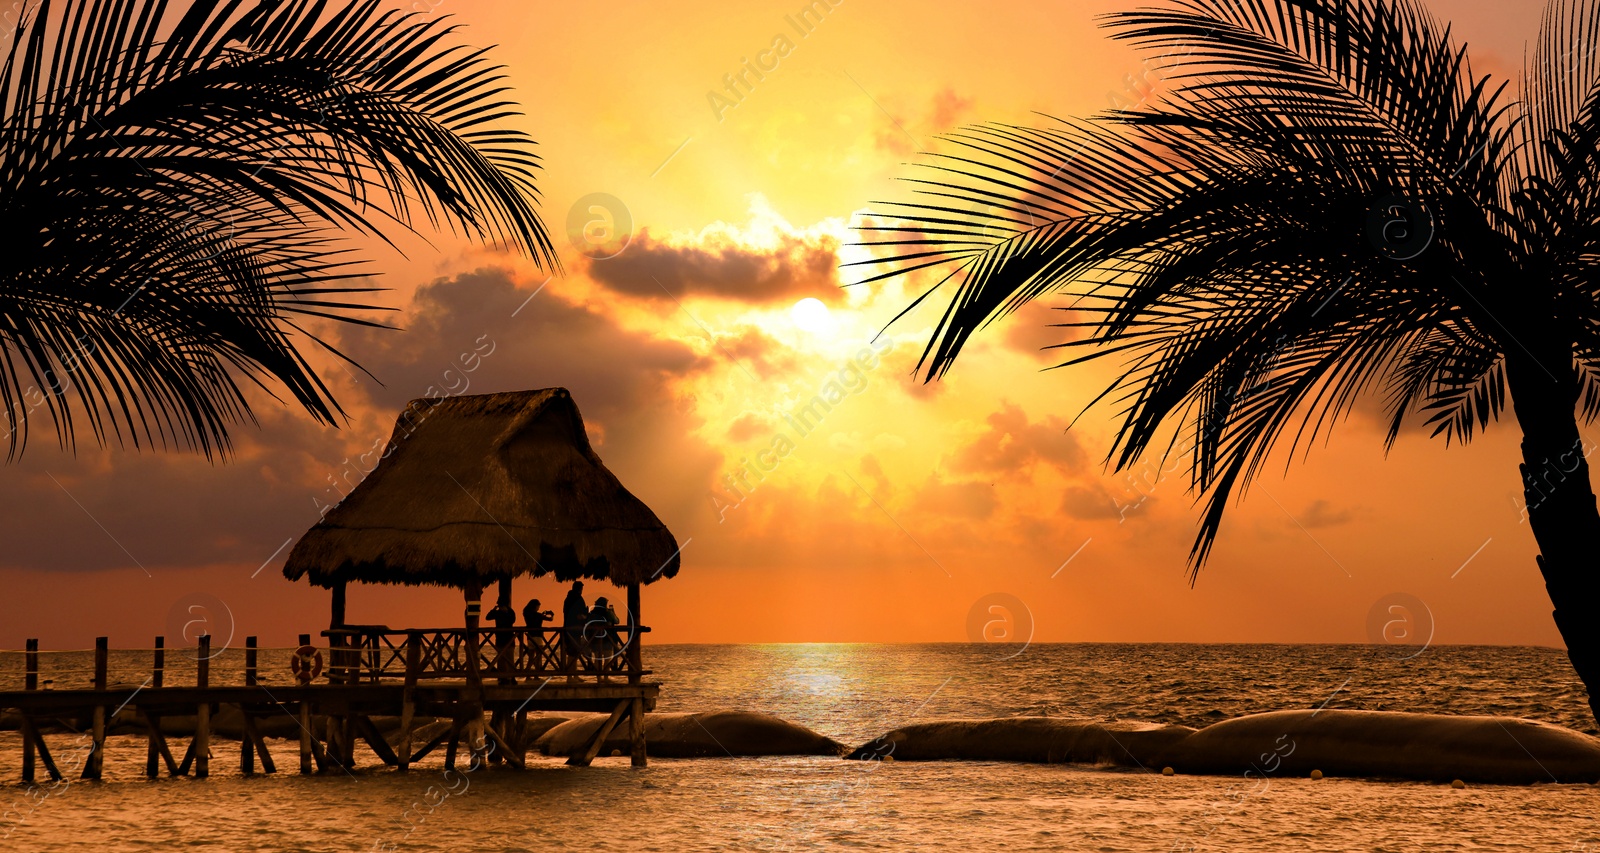 Image of Picturesque view of sea, palm trees and wooden pier at sunset